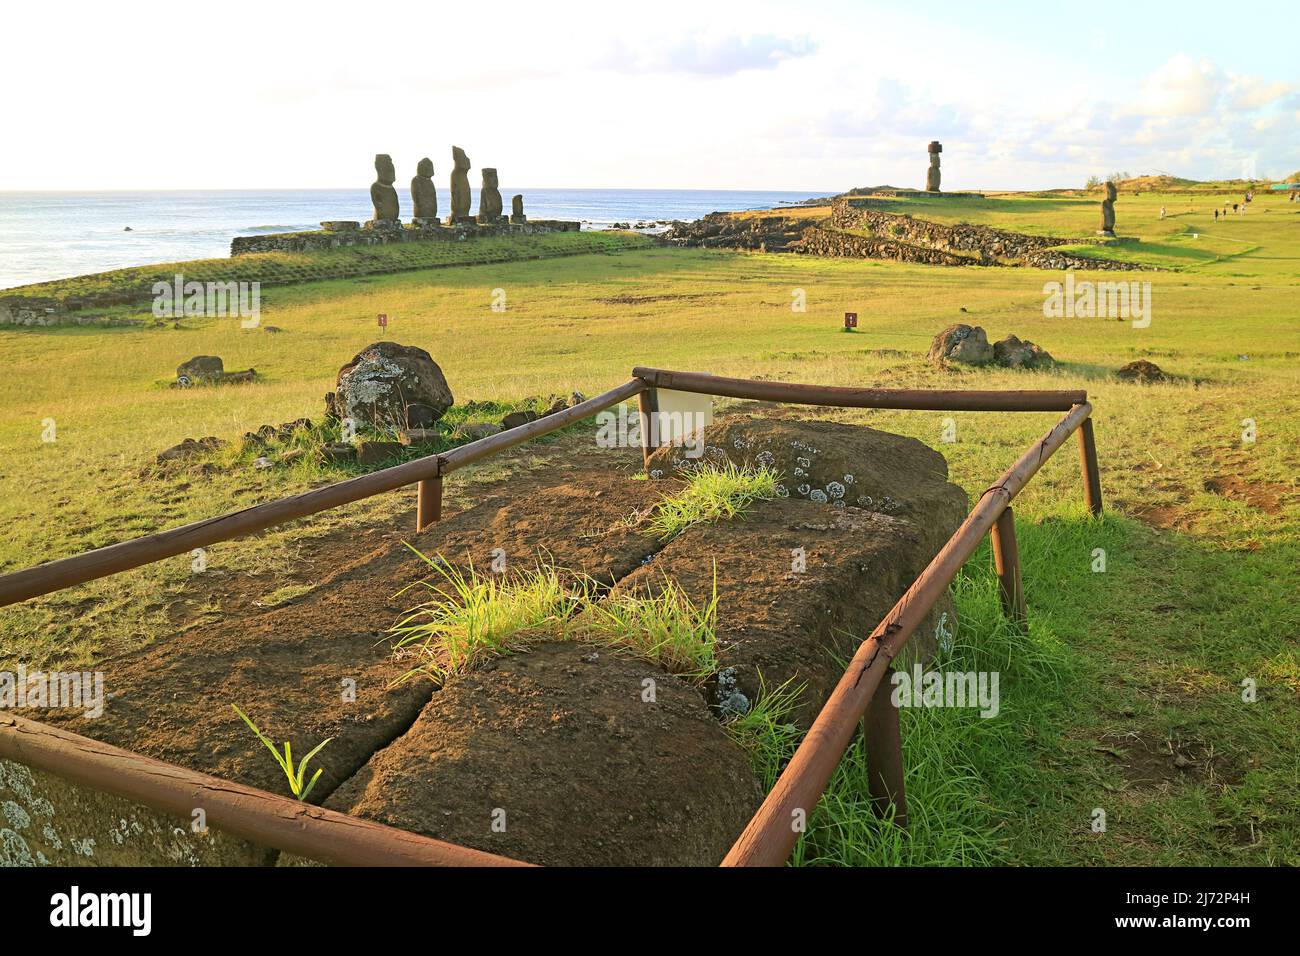 Archaeology Site with Ahu Tahai and Ahu Ko Te Riku Ceremonial Platform at the Pacific West Coast of Easter Island, Chile Stock Photo